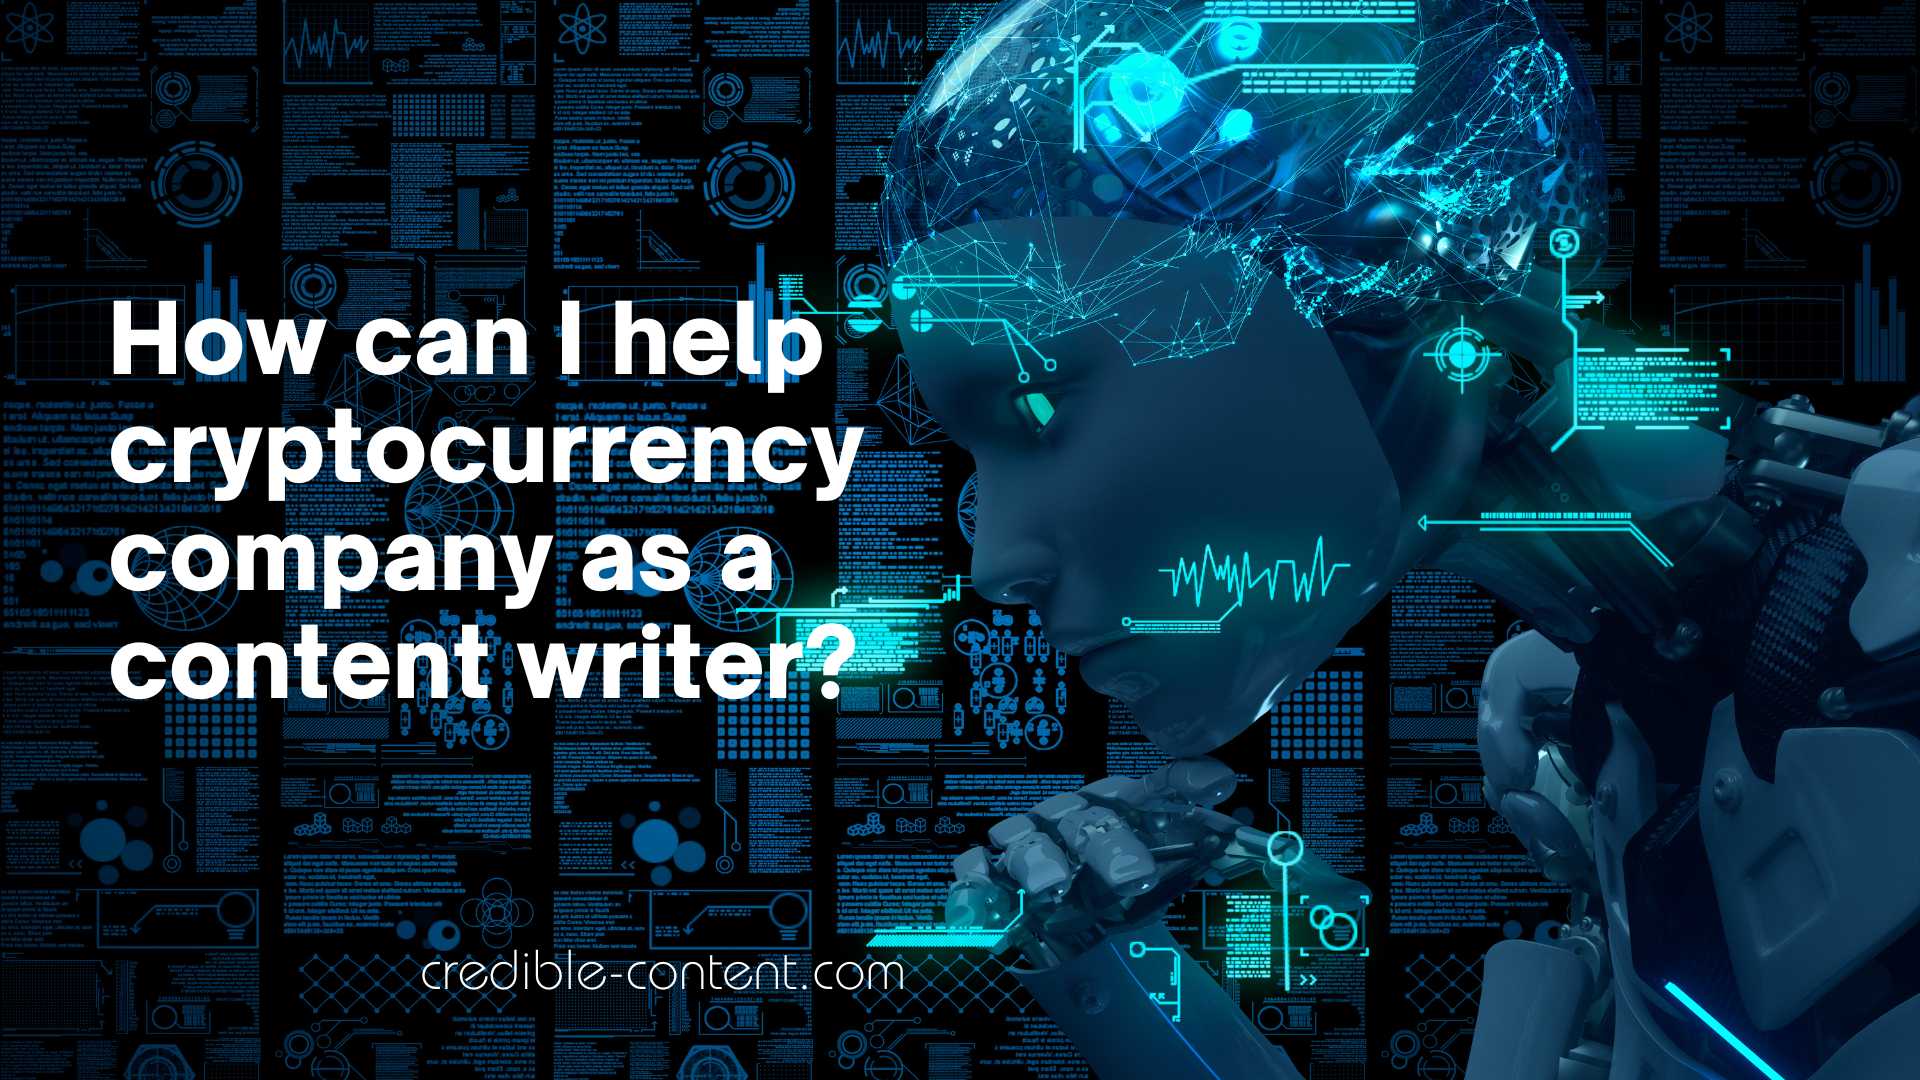 How can I help a cryptocurrency company as a content writer?